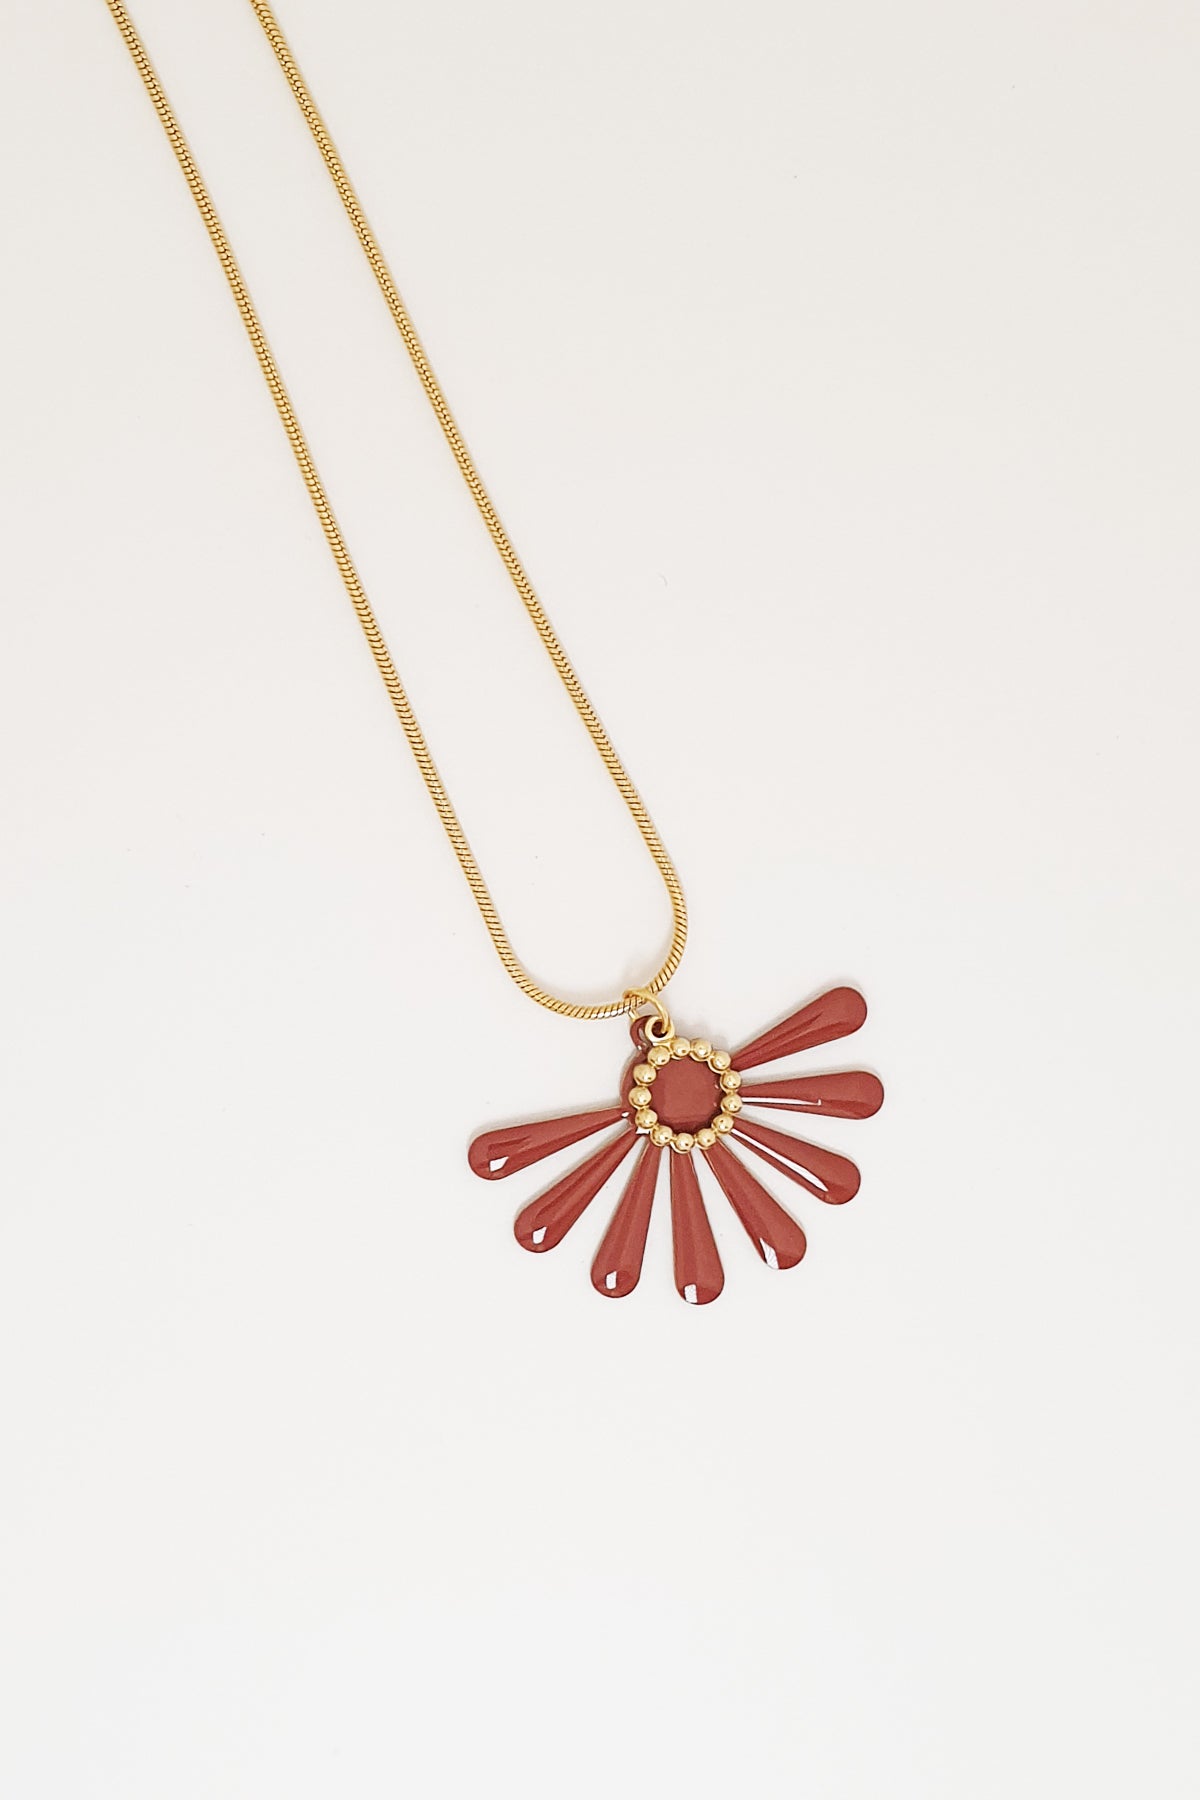 A necklace sits against a white background. It features a gold chain and a brown coloured floral enamel shape. A tiny brass ring encircles the disk of the floral enamel piece.